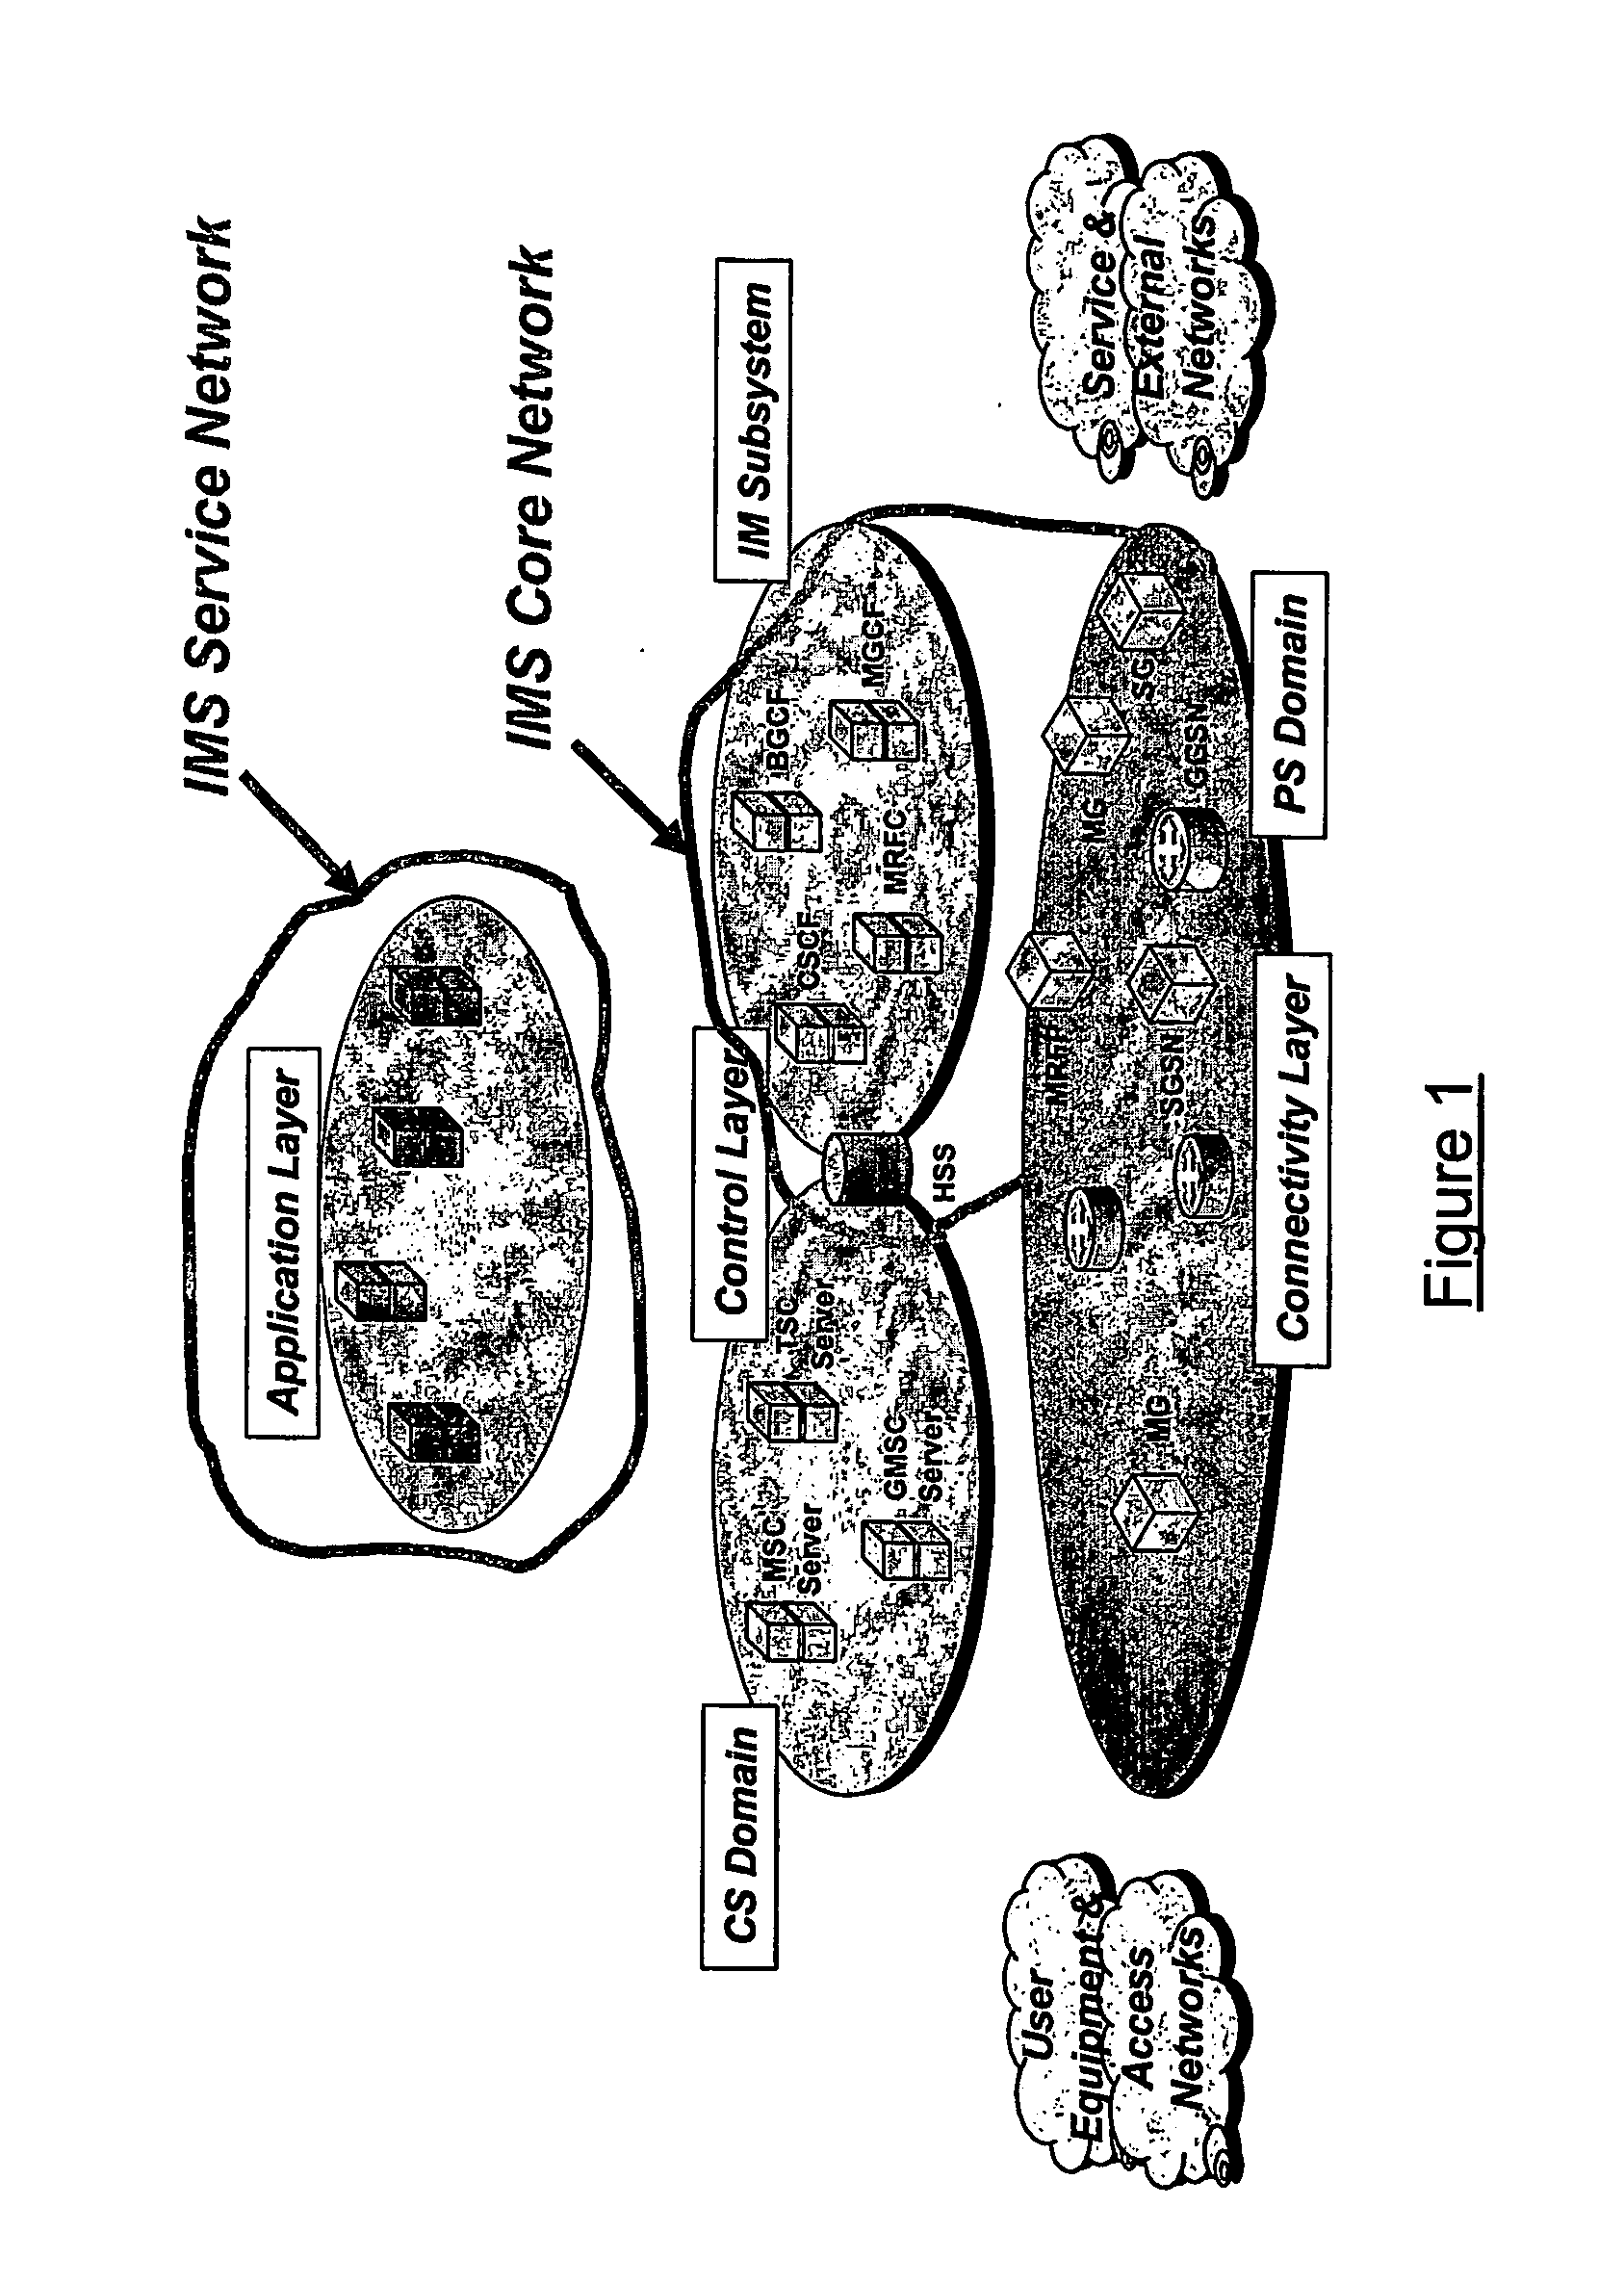 Data Sharing in a Multimedia Communication System